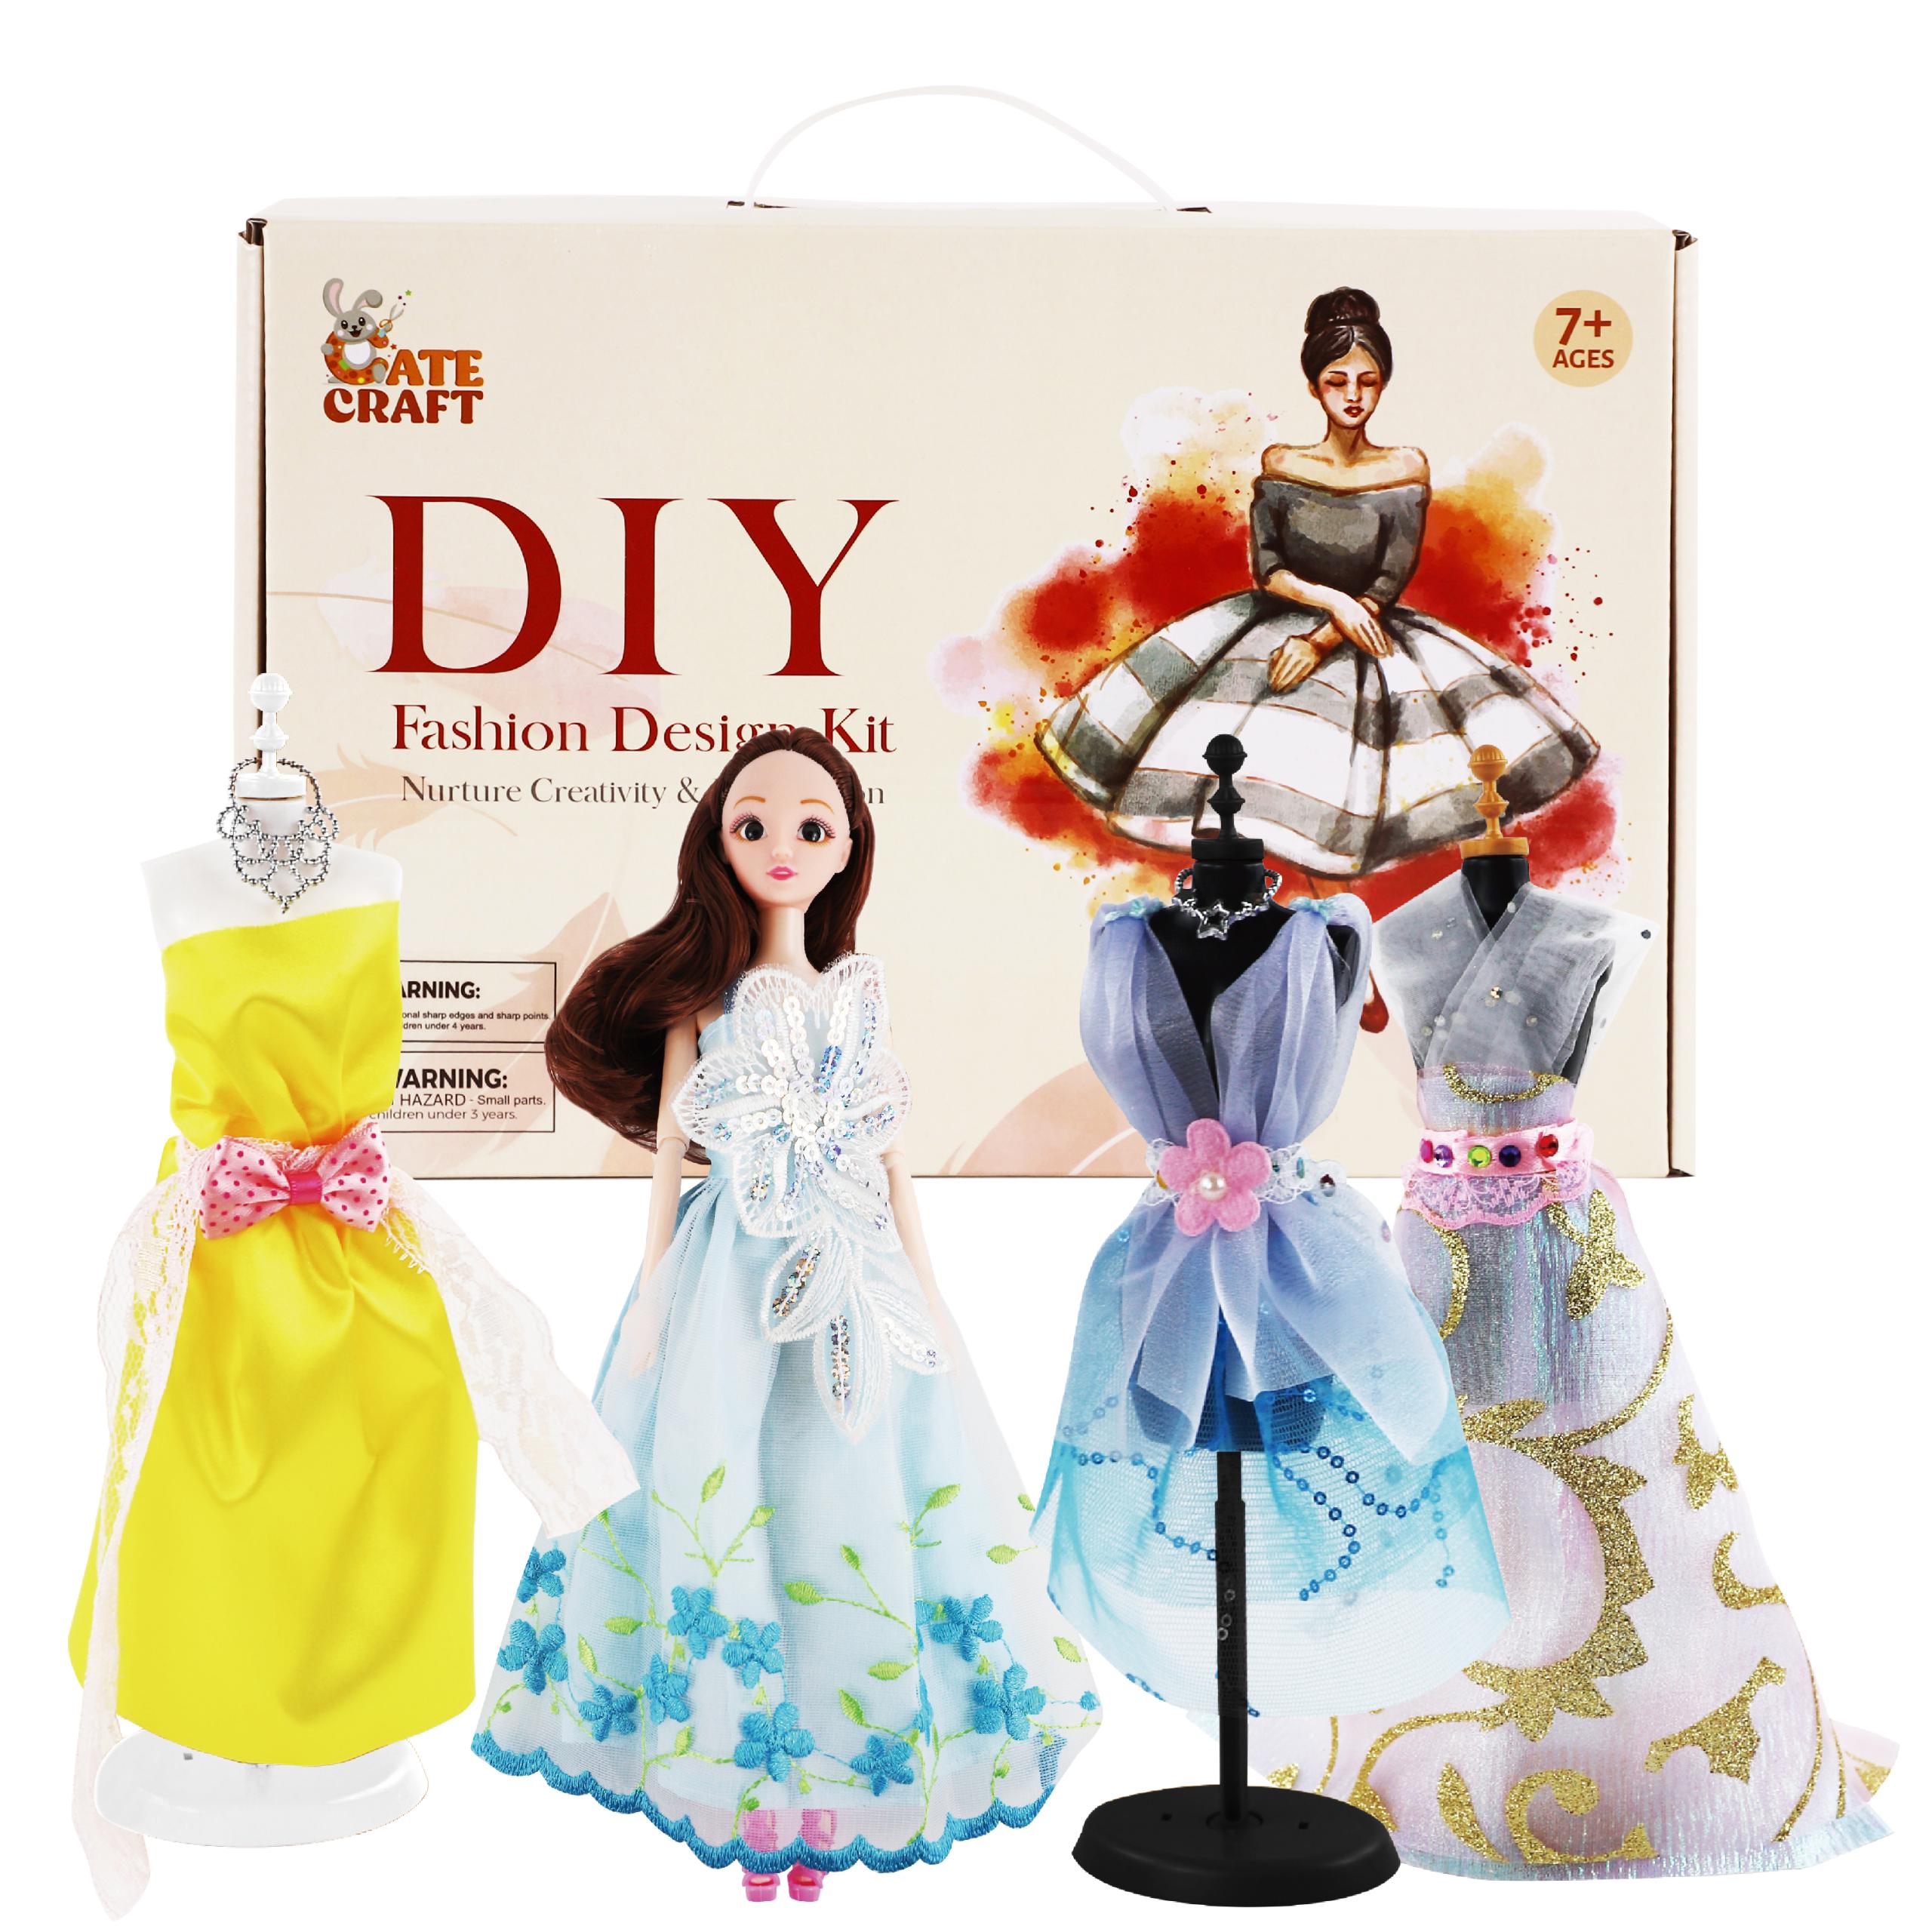 Cate Craft fashion designer kit with doll and sew kit for girls 8-12 –  Creativity DIY Arts & Crafts, Doll Clothes, birthday gift. - Cate Craft